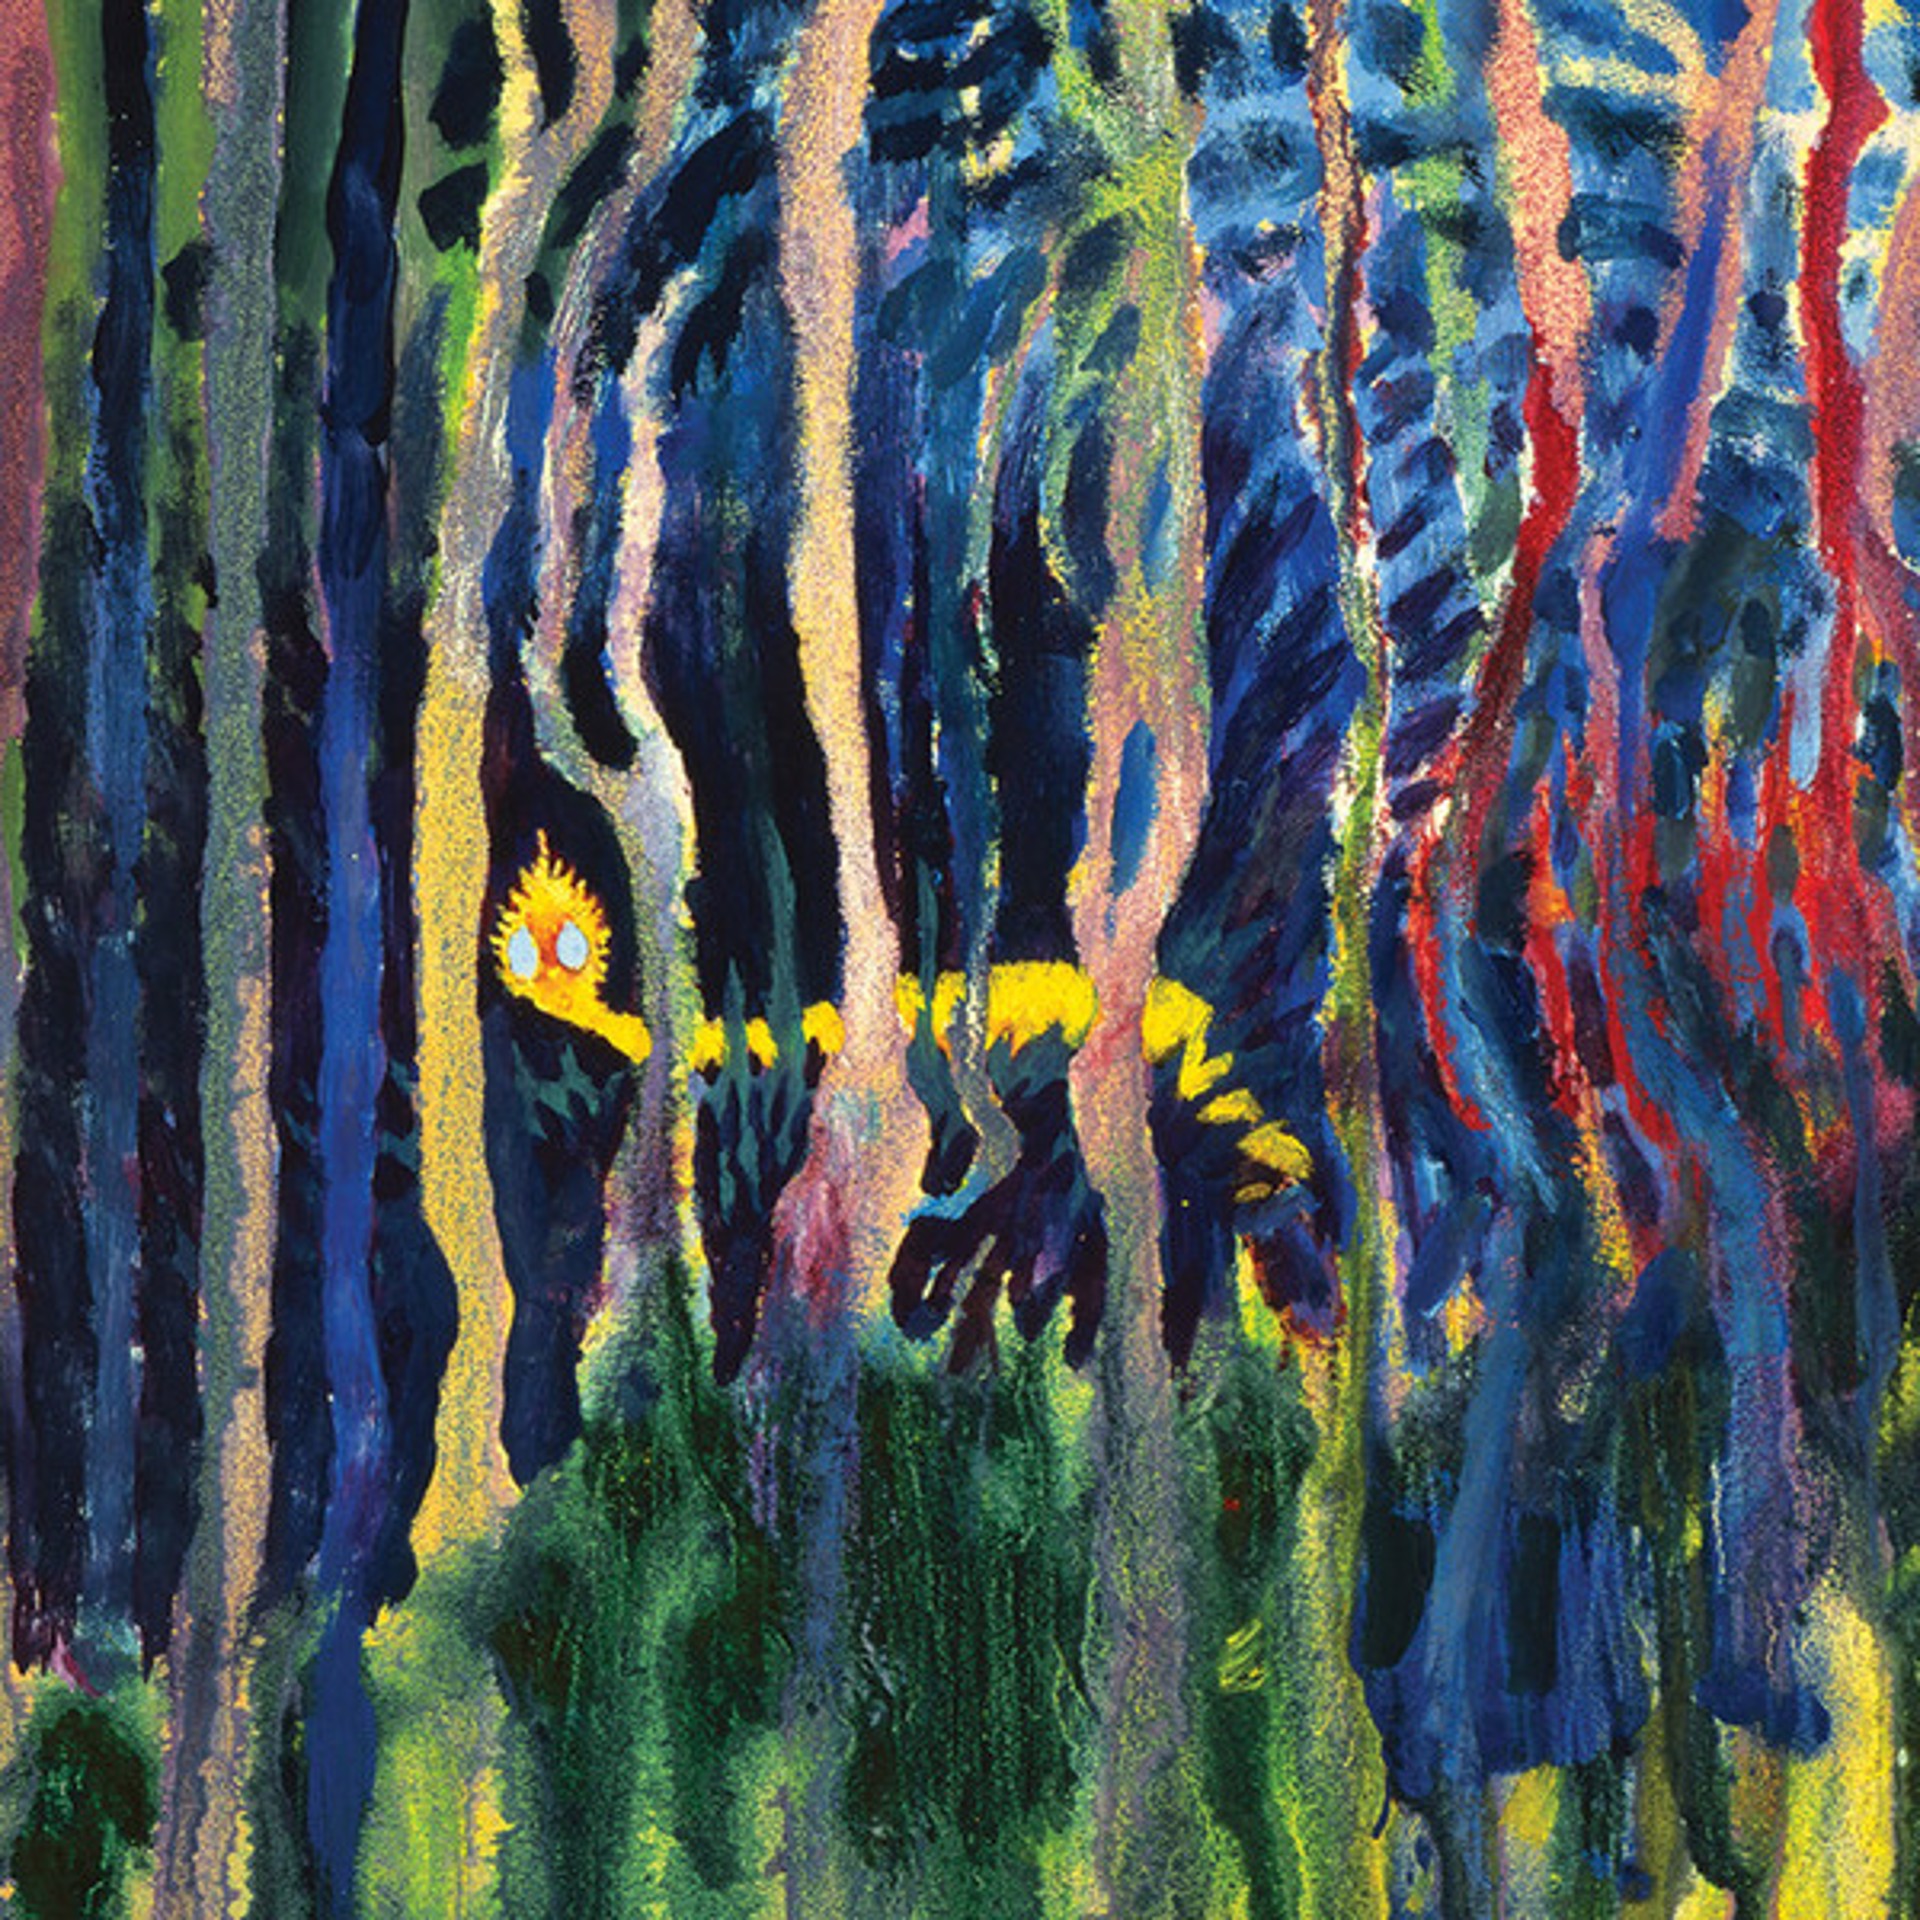 Worm Burning Bright in the Forest in the Night by Theodor Seuss Geisel